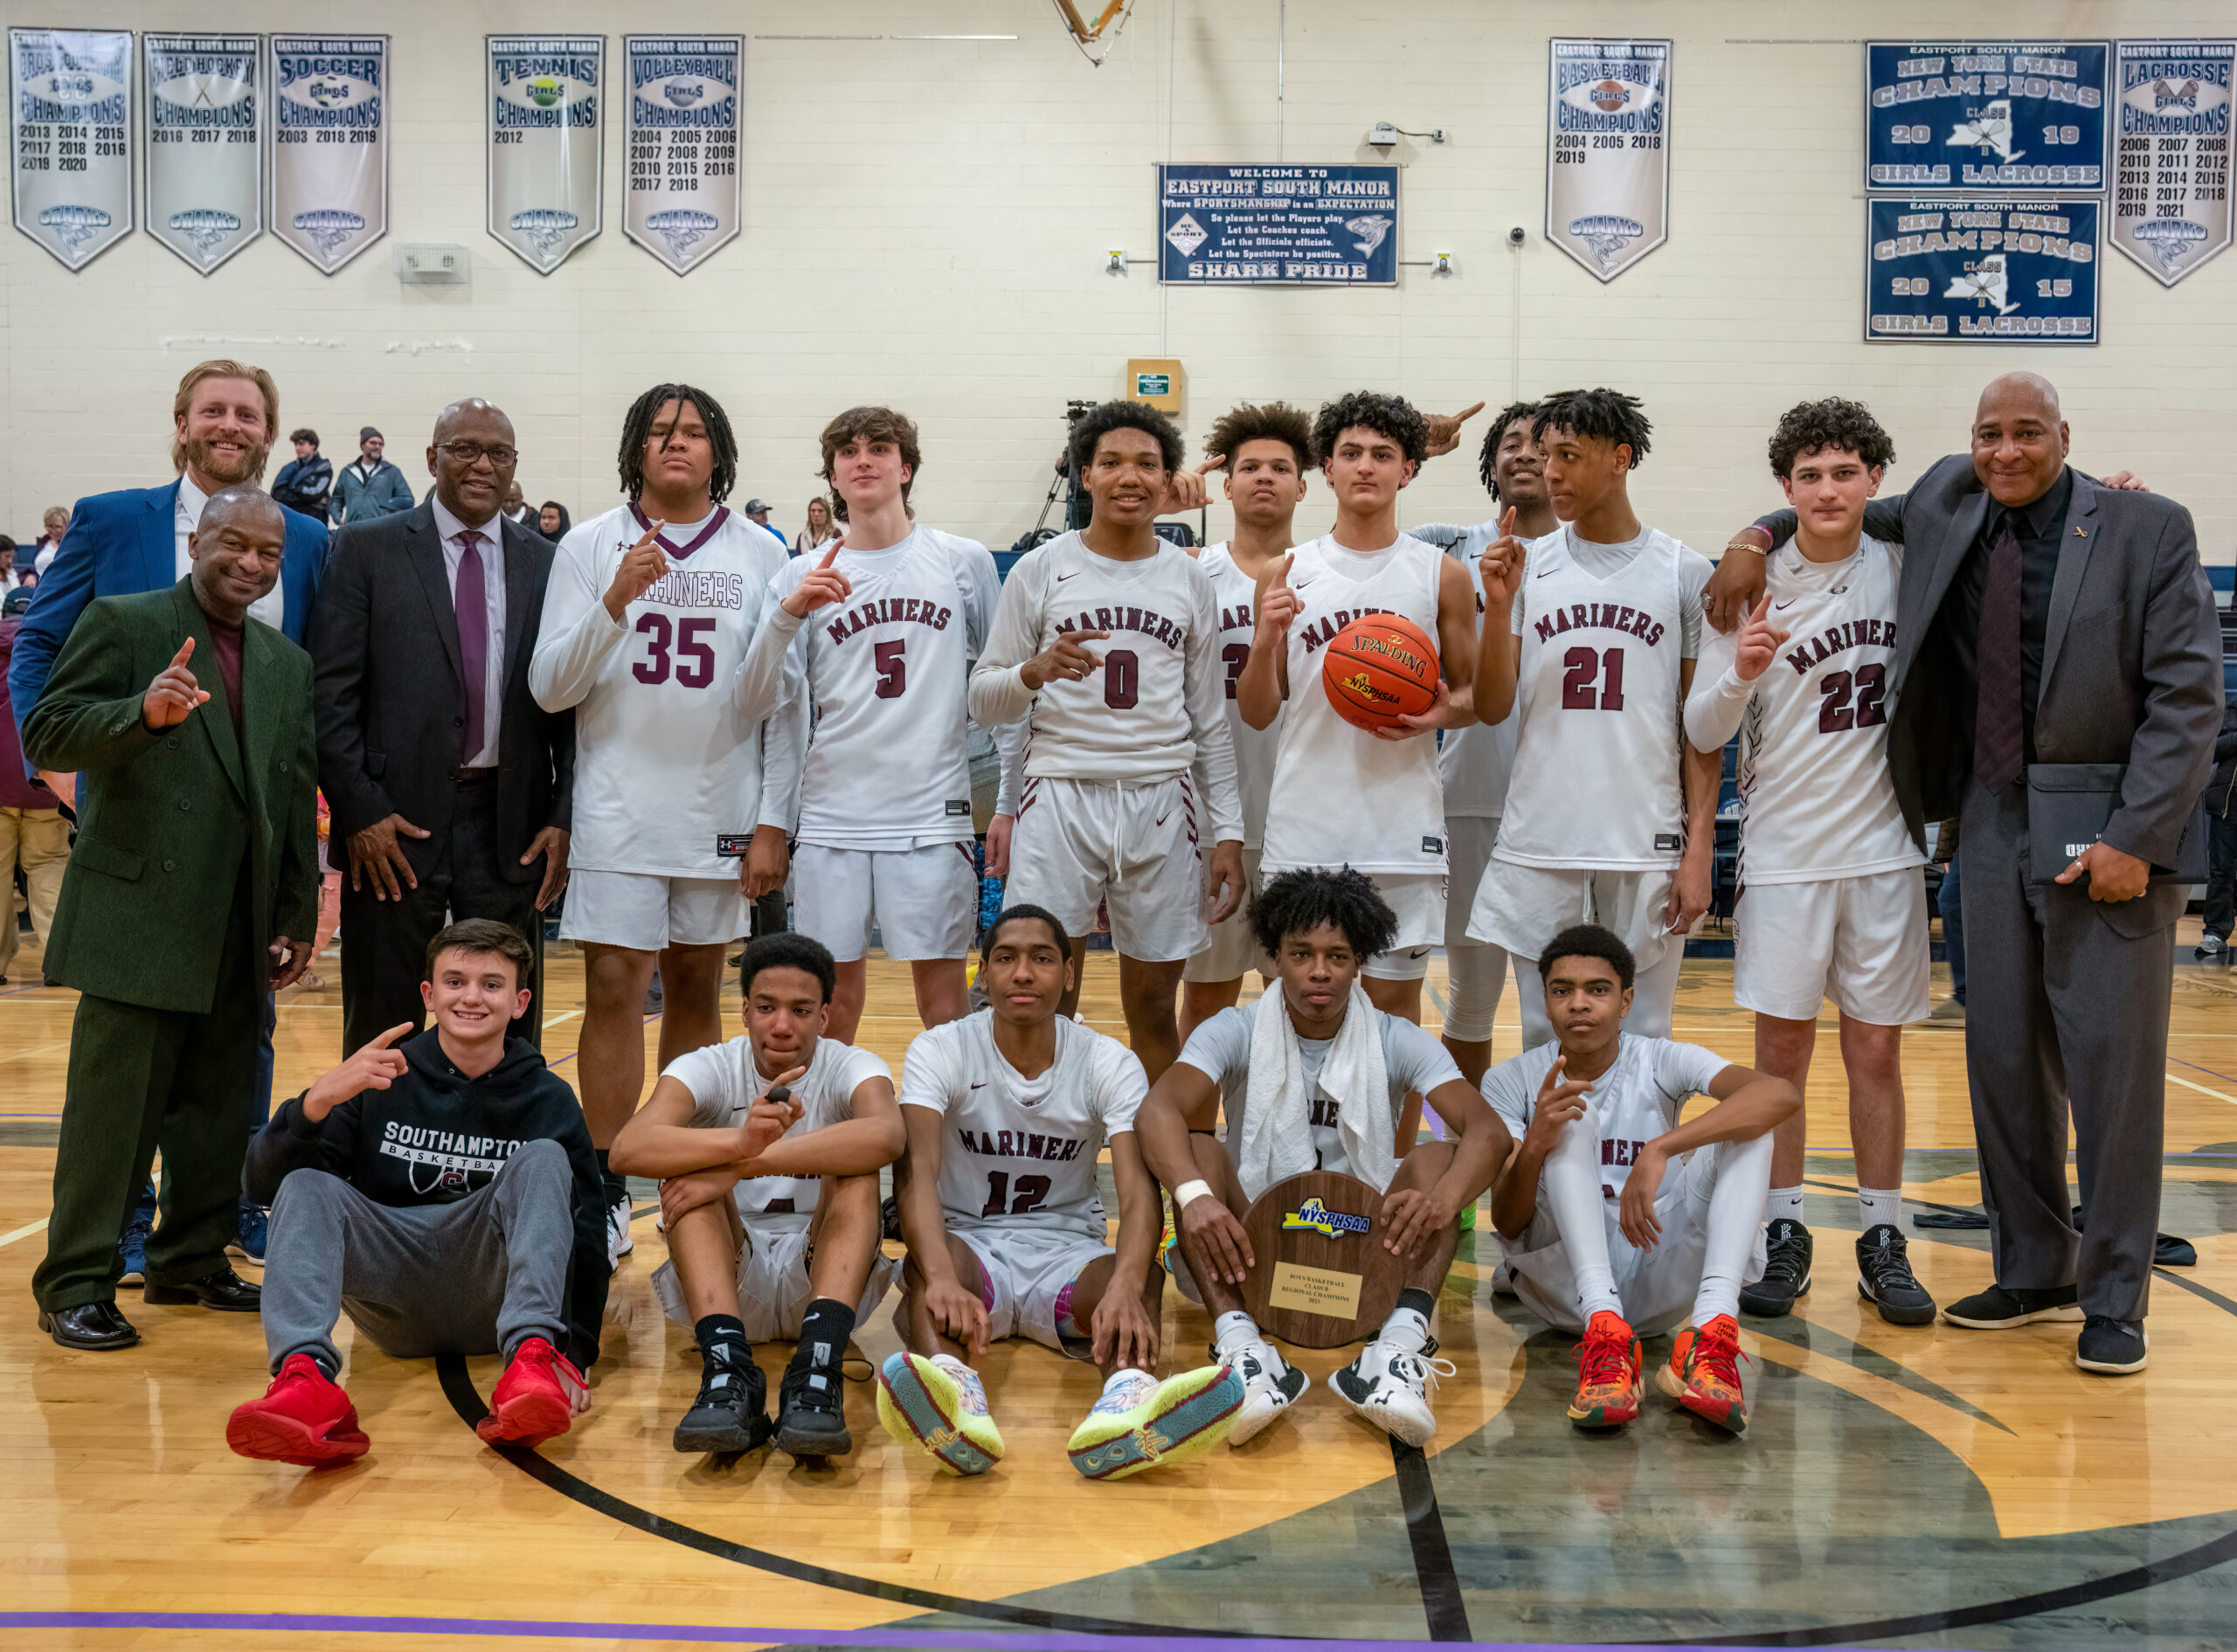 The Southampton boys basketball team defeated Valhalla, 64-55, in the Class B Regional Final on Friday night at Eastport-South Manor High School.   RON ESPOSITO